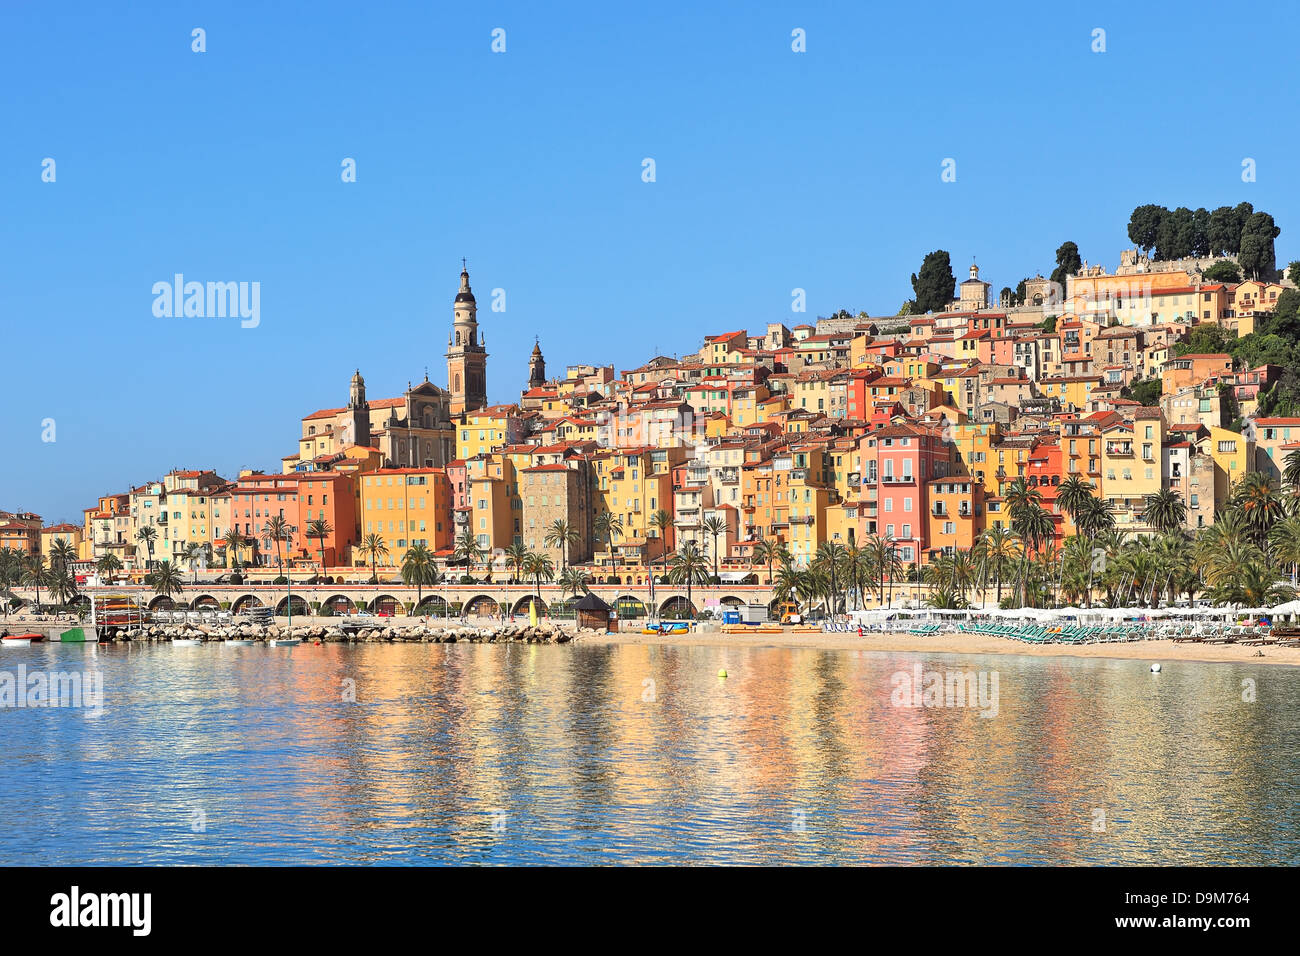 View on colorful houses of old town of Menton under blue sky on French Riviera in Southern France. Stock Photo